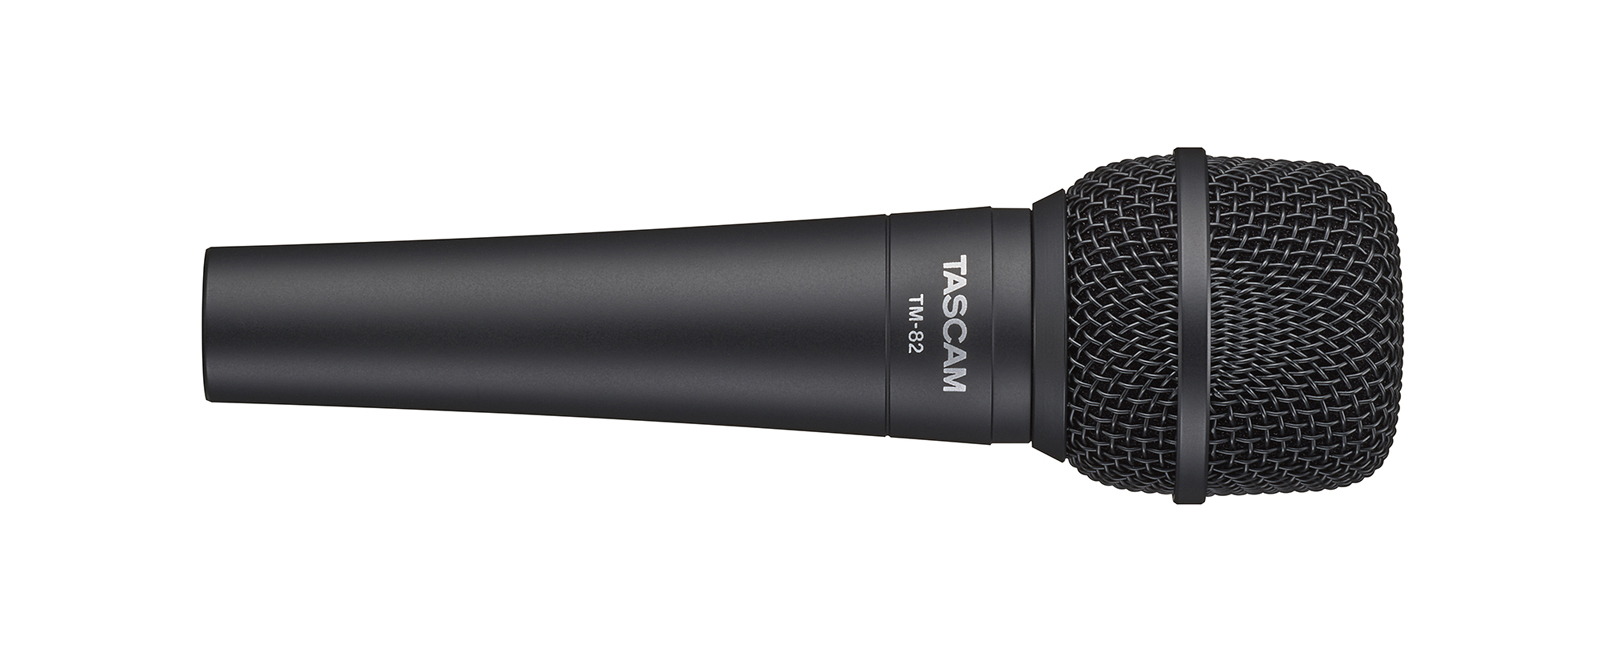 TASCAM Introduces the TM-82 Dynamic Microphone